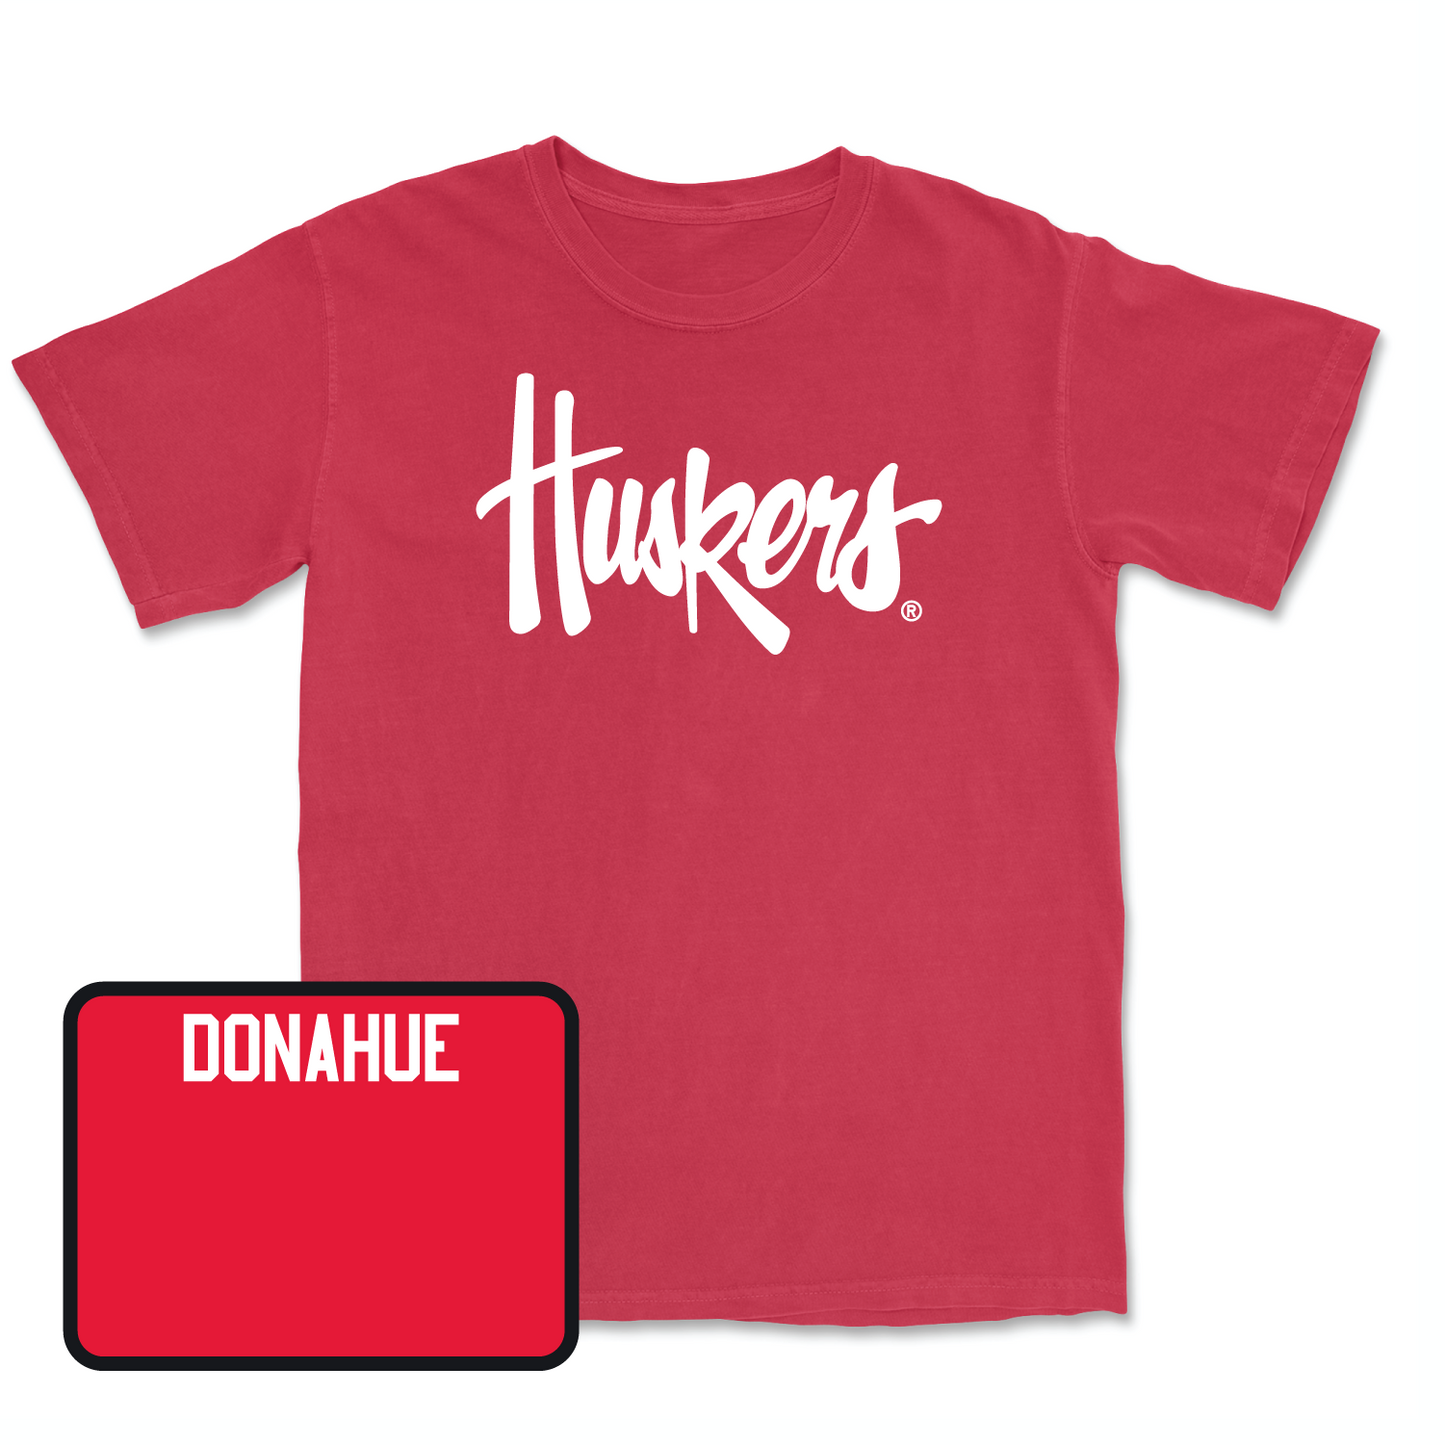 Red Women's Swim & Dive Huskers Tee X-Large / Gabby Donahue